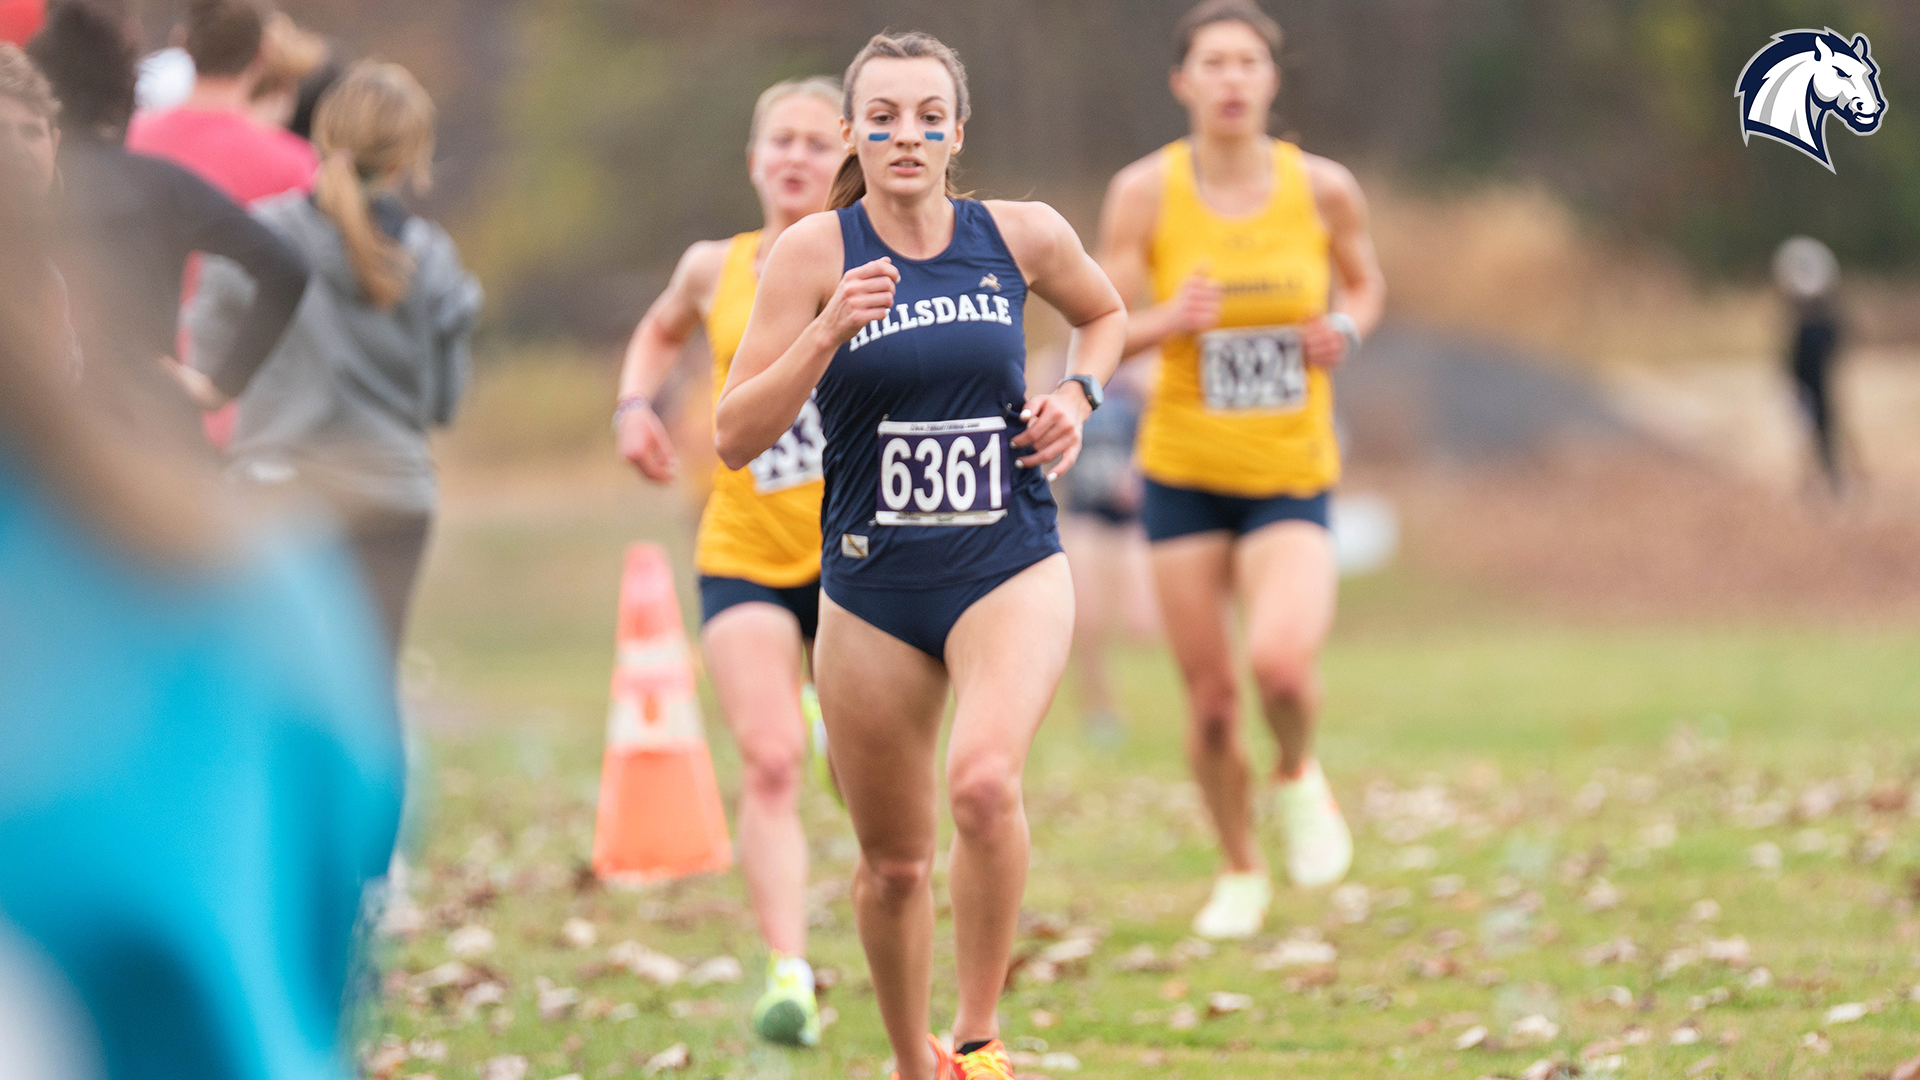 Wamsley finishes fourth, Chargers sixth as a team in strong finish at NCAA Midwest Regional